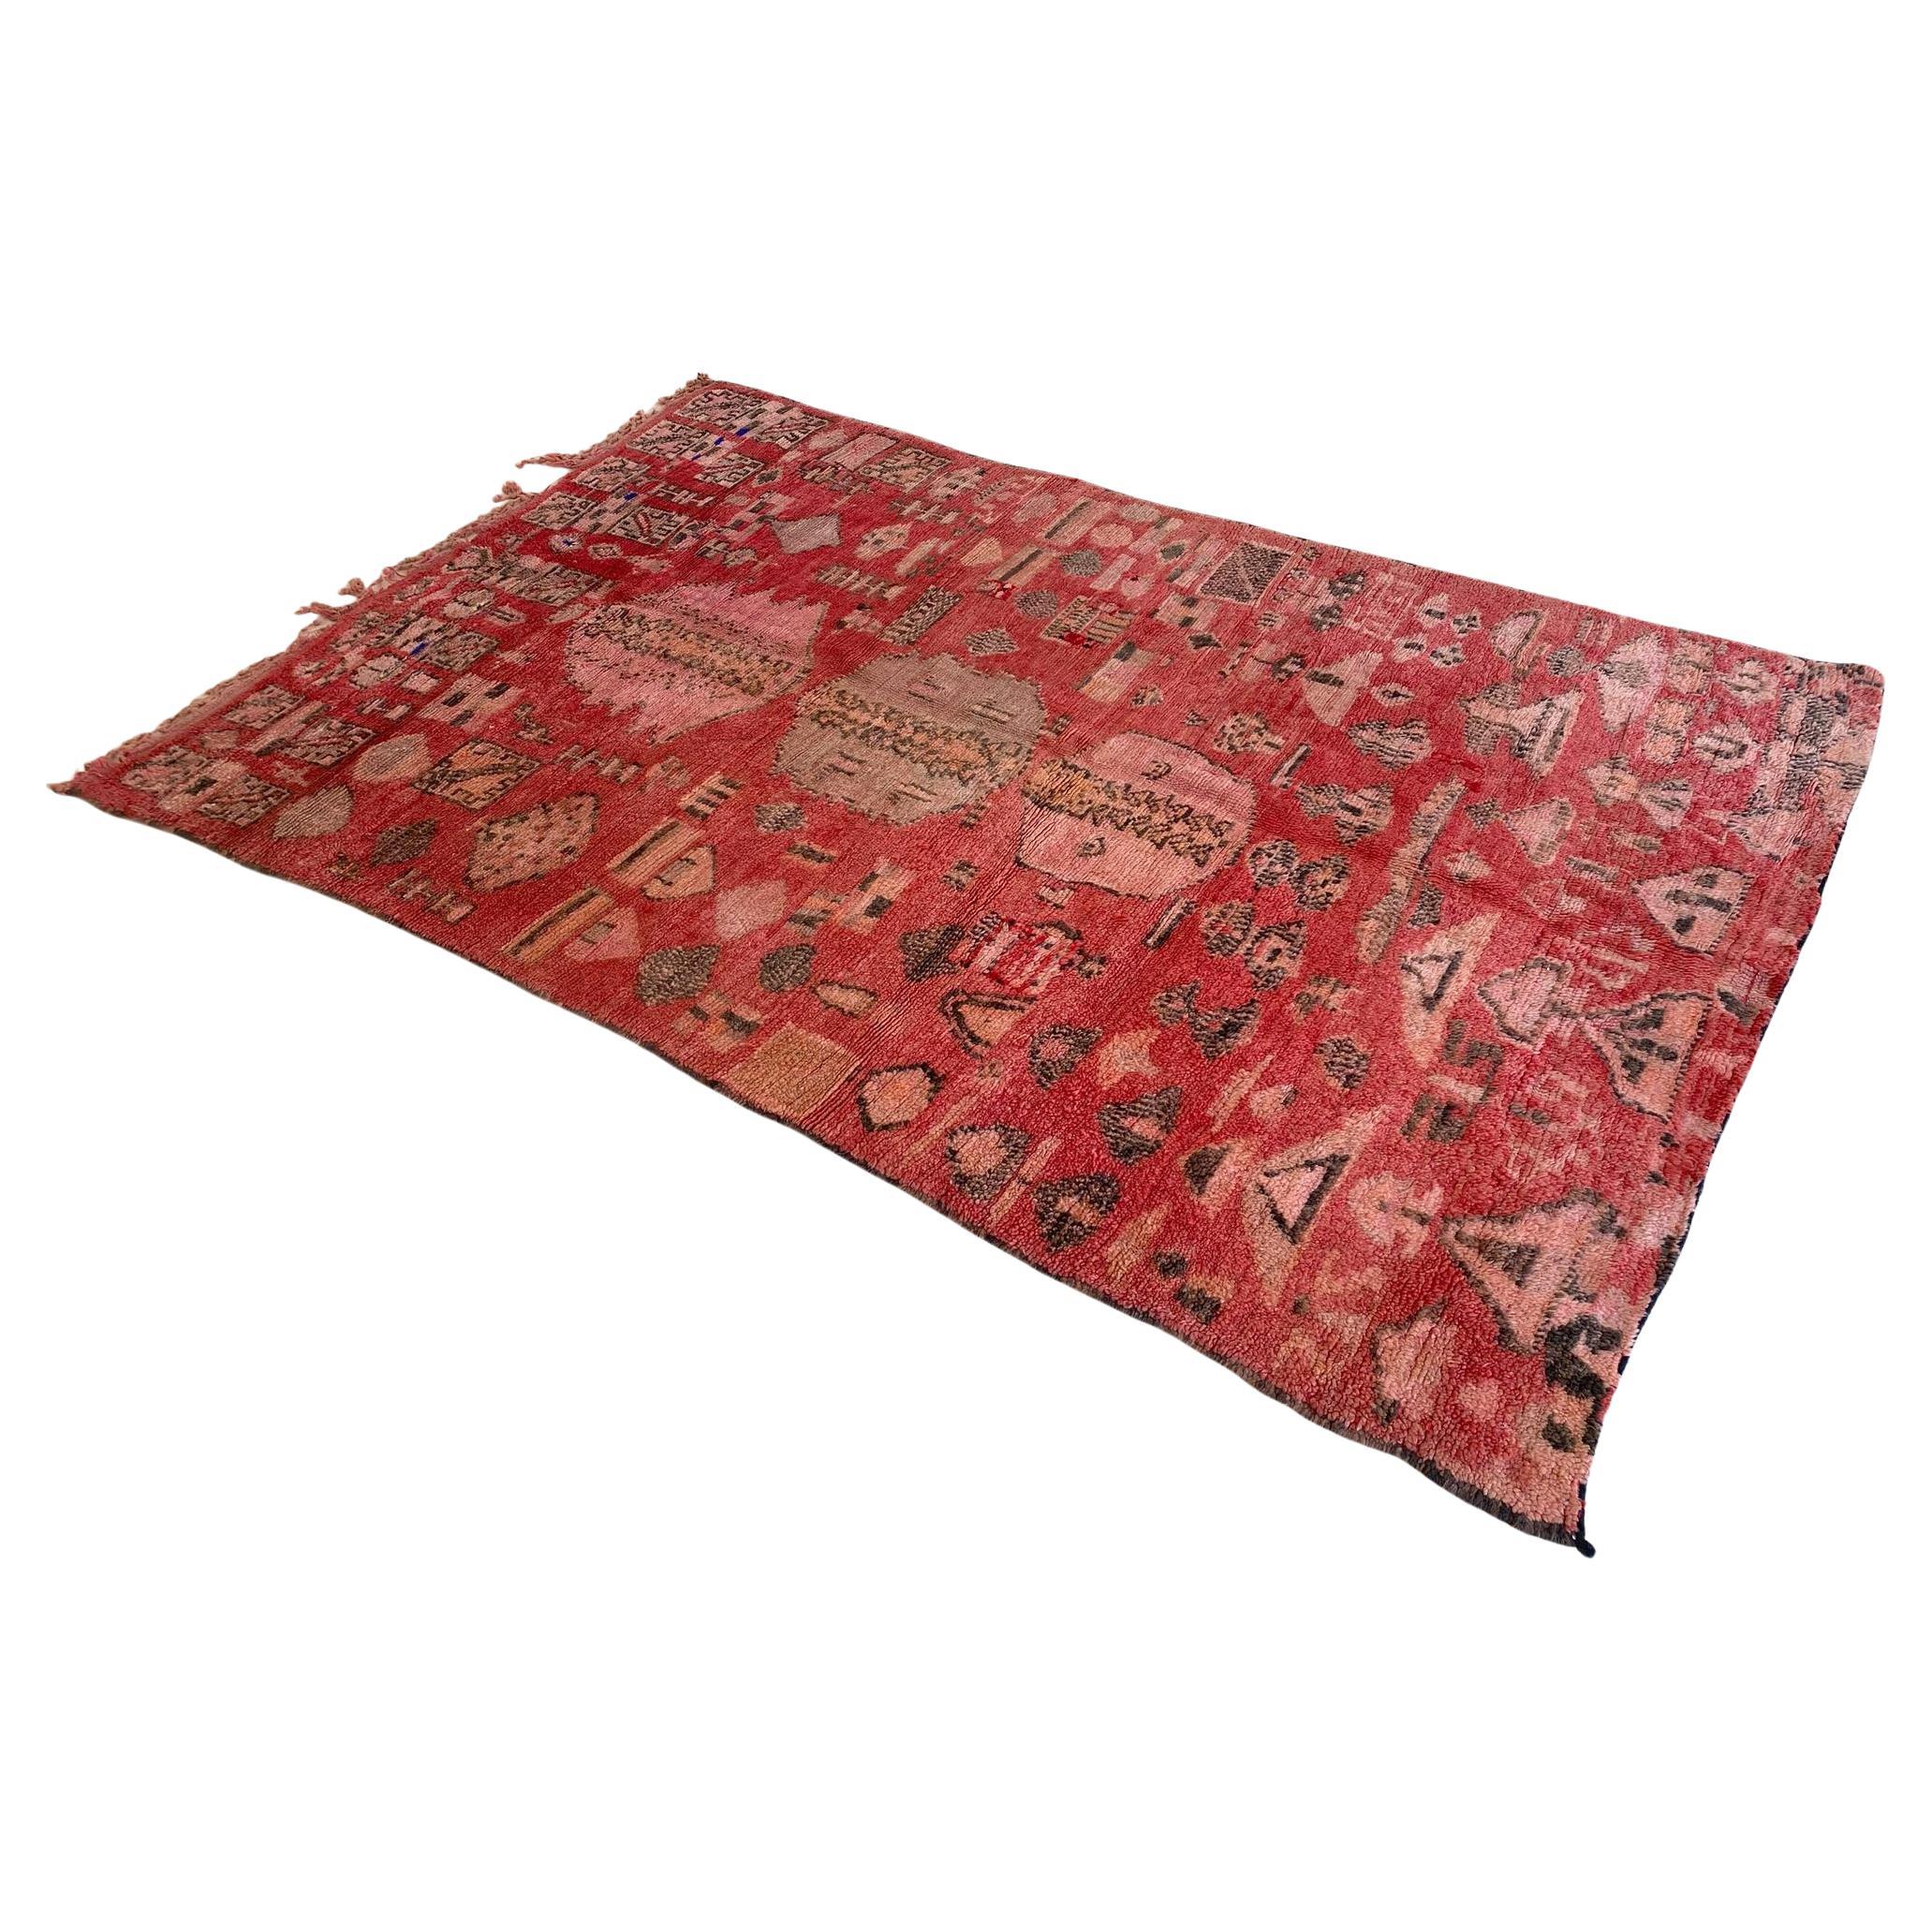 Collector Moroccan Rehamna rug - Red/pink - 5.8x8.6feet / 177x264cm